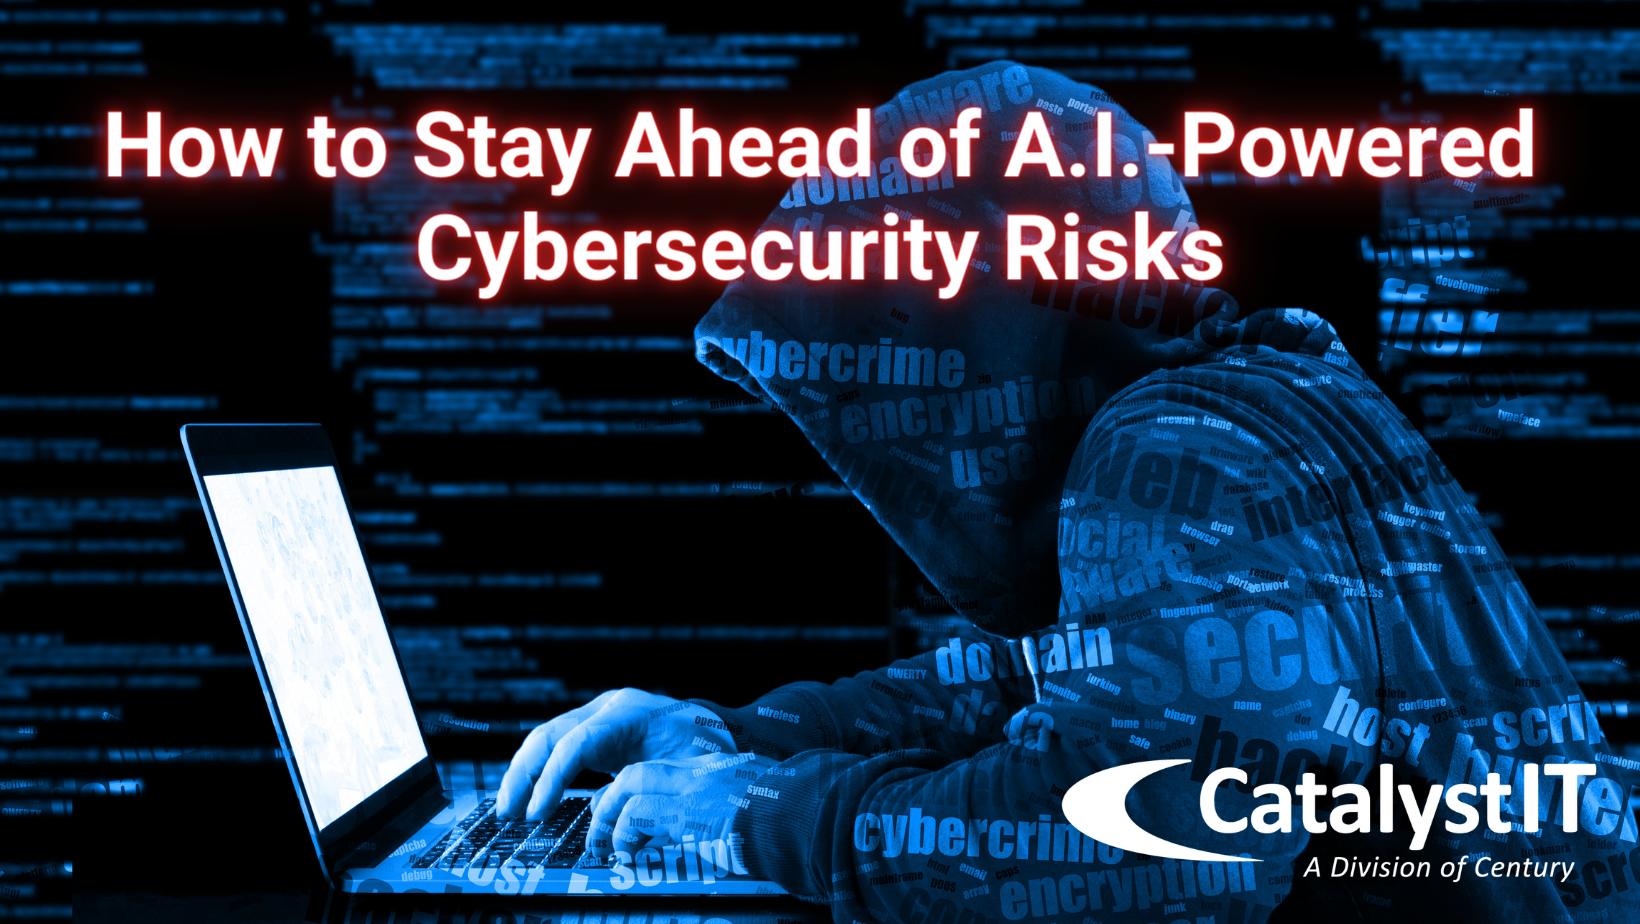 How to stay ahead of A.I.-Powered Cybersecurity Risks